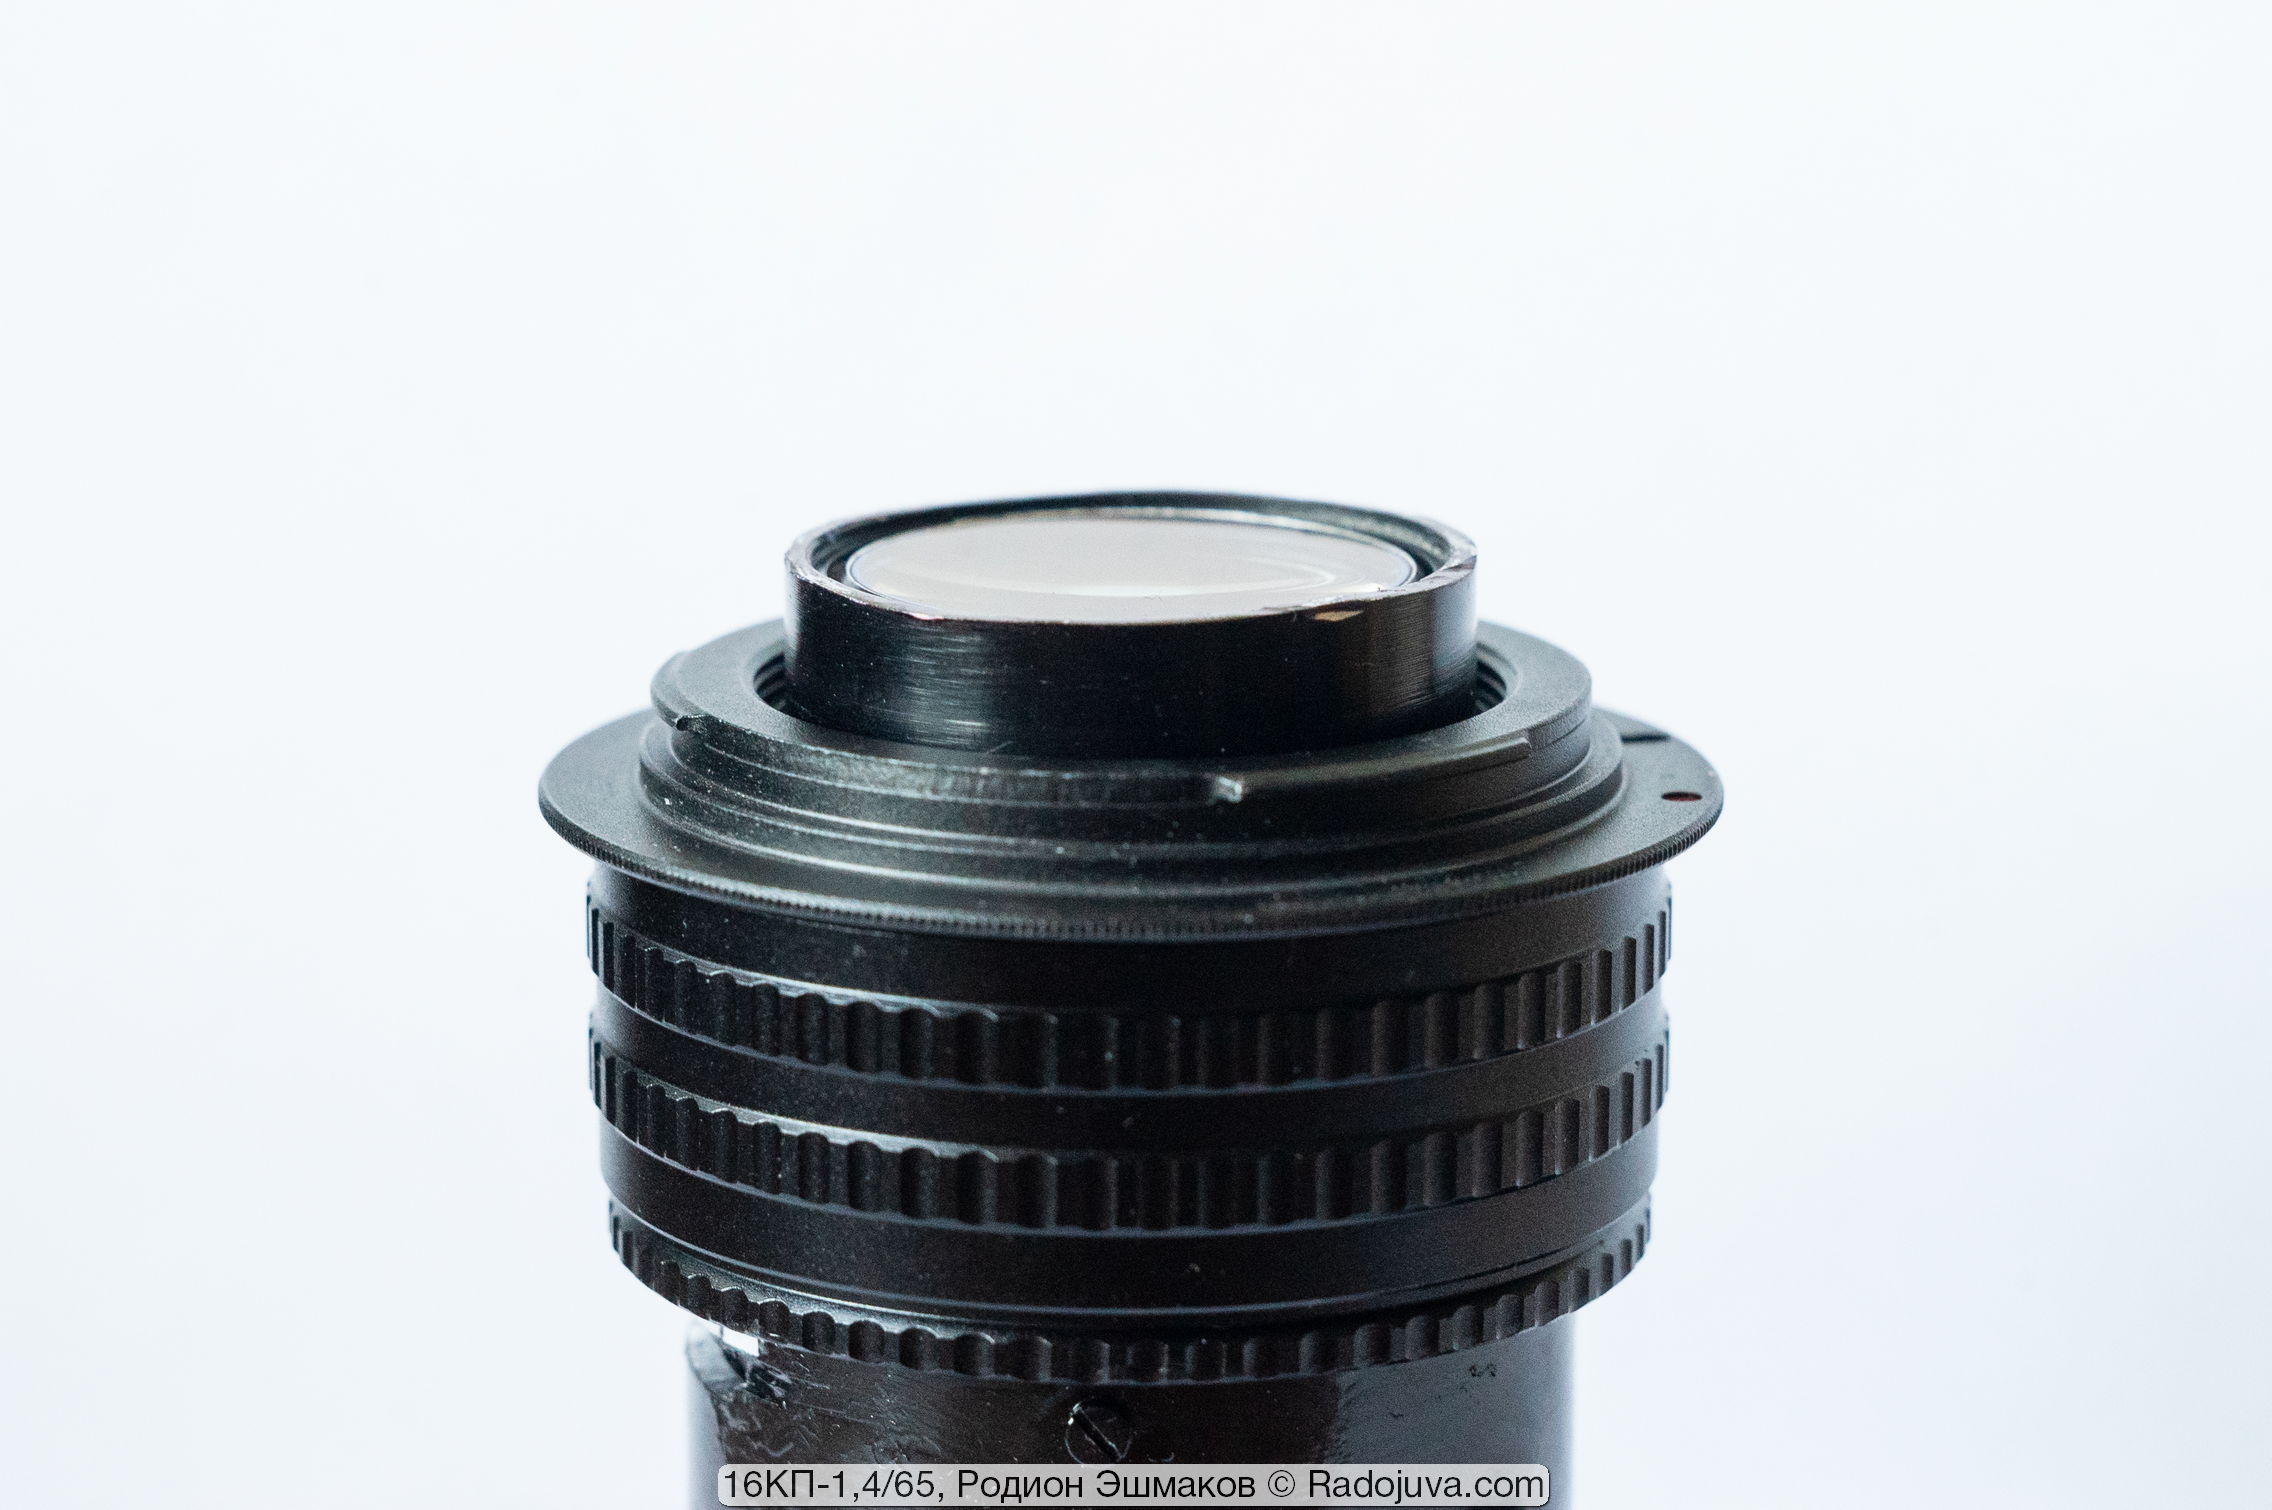 The lens unit protrudes far beyond the plane of the M42-EOS adapter screwed onto the lens.